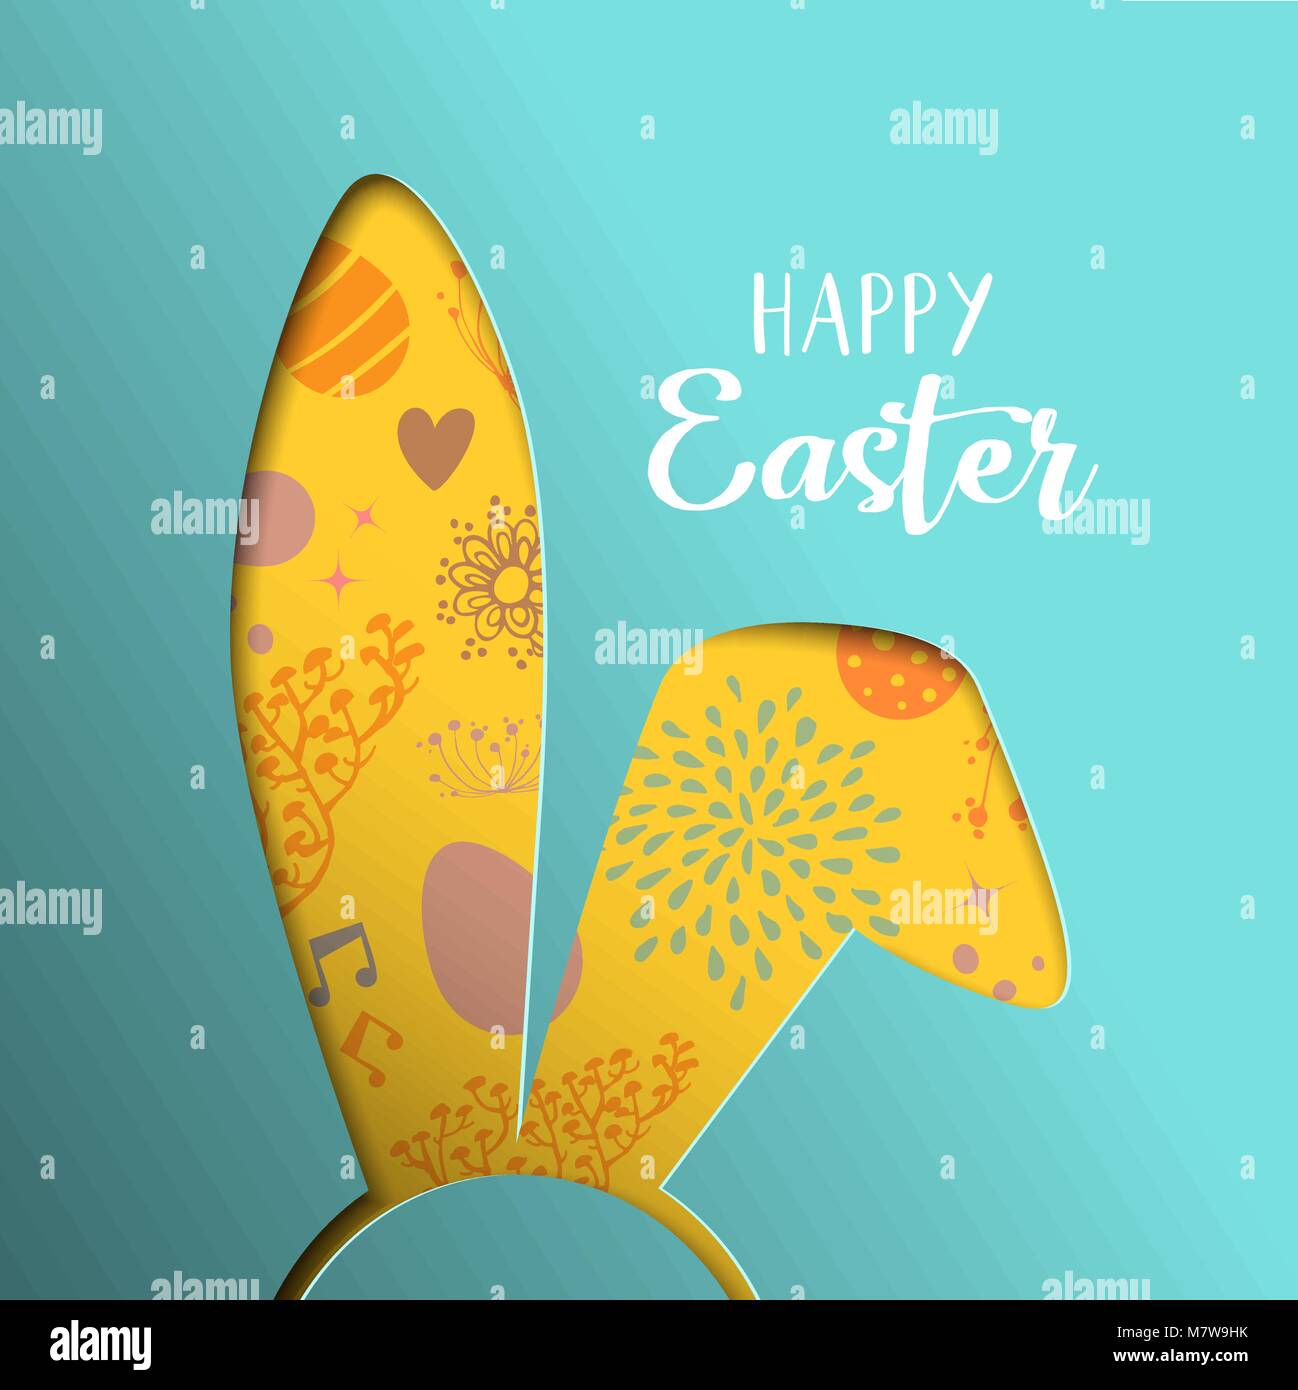 Happy Easter greeting illustration. Paper cut bunny ears cutout with colorful hand drawn holiday eggs and spring flower doodles. EPS10 vector. Stock Vector